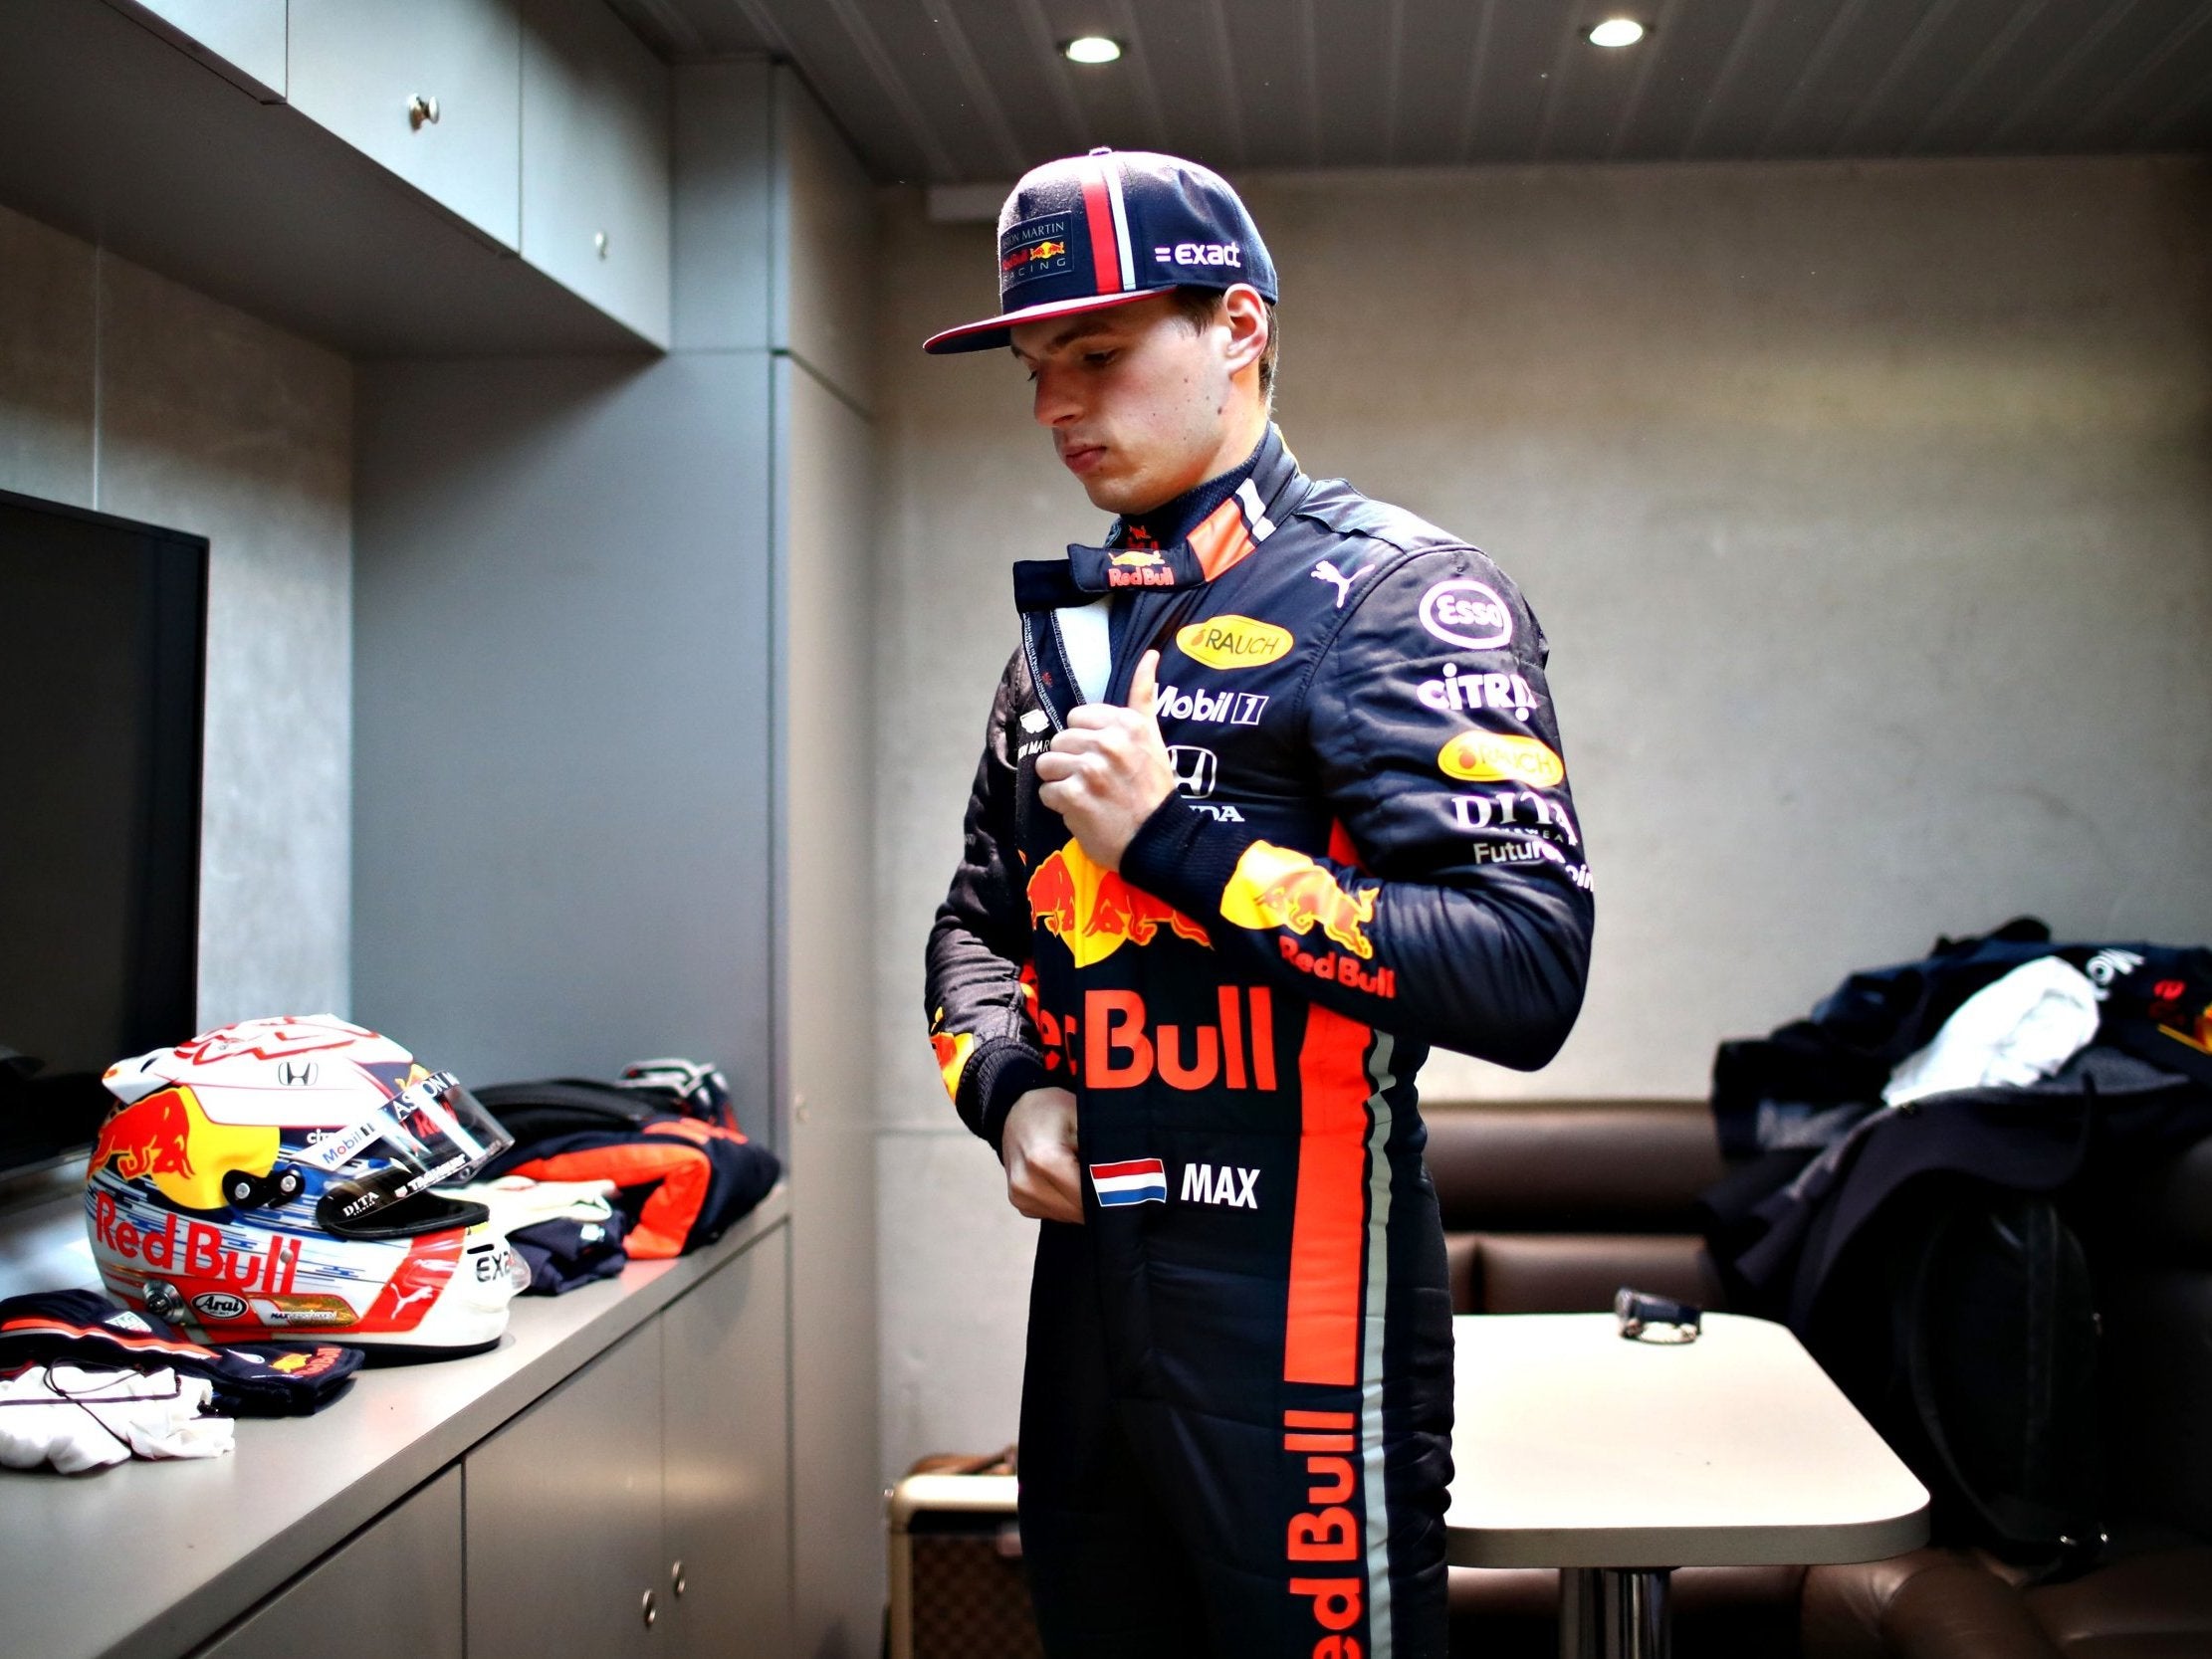 The Red Bull driver could challenge Lewis Hamilton for the World Championship